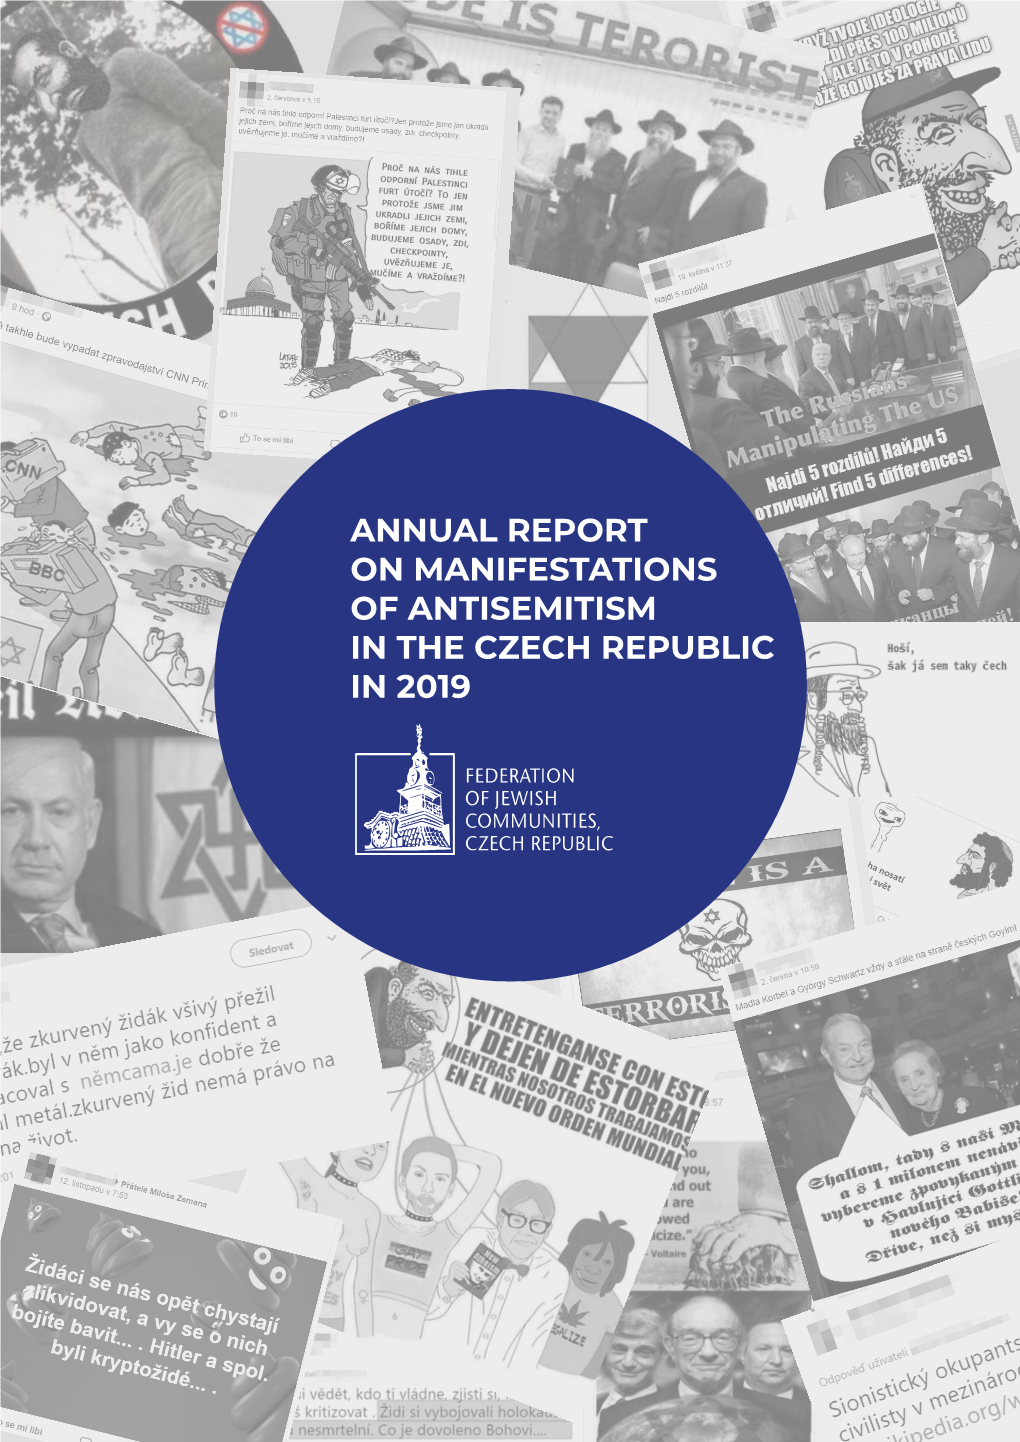 ANNUAL REPORT on MANIFESTATIONS of ANTISEMITISM in the CZECH REPUBLIC in 2019 Published by the Federation of Jewish Communities in the Czech Republic